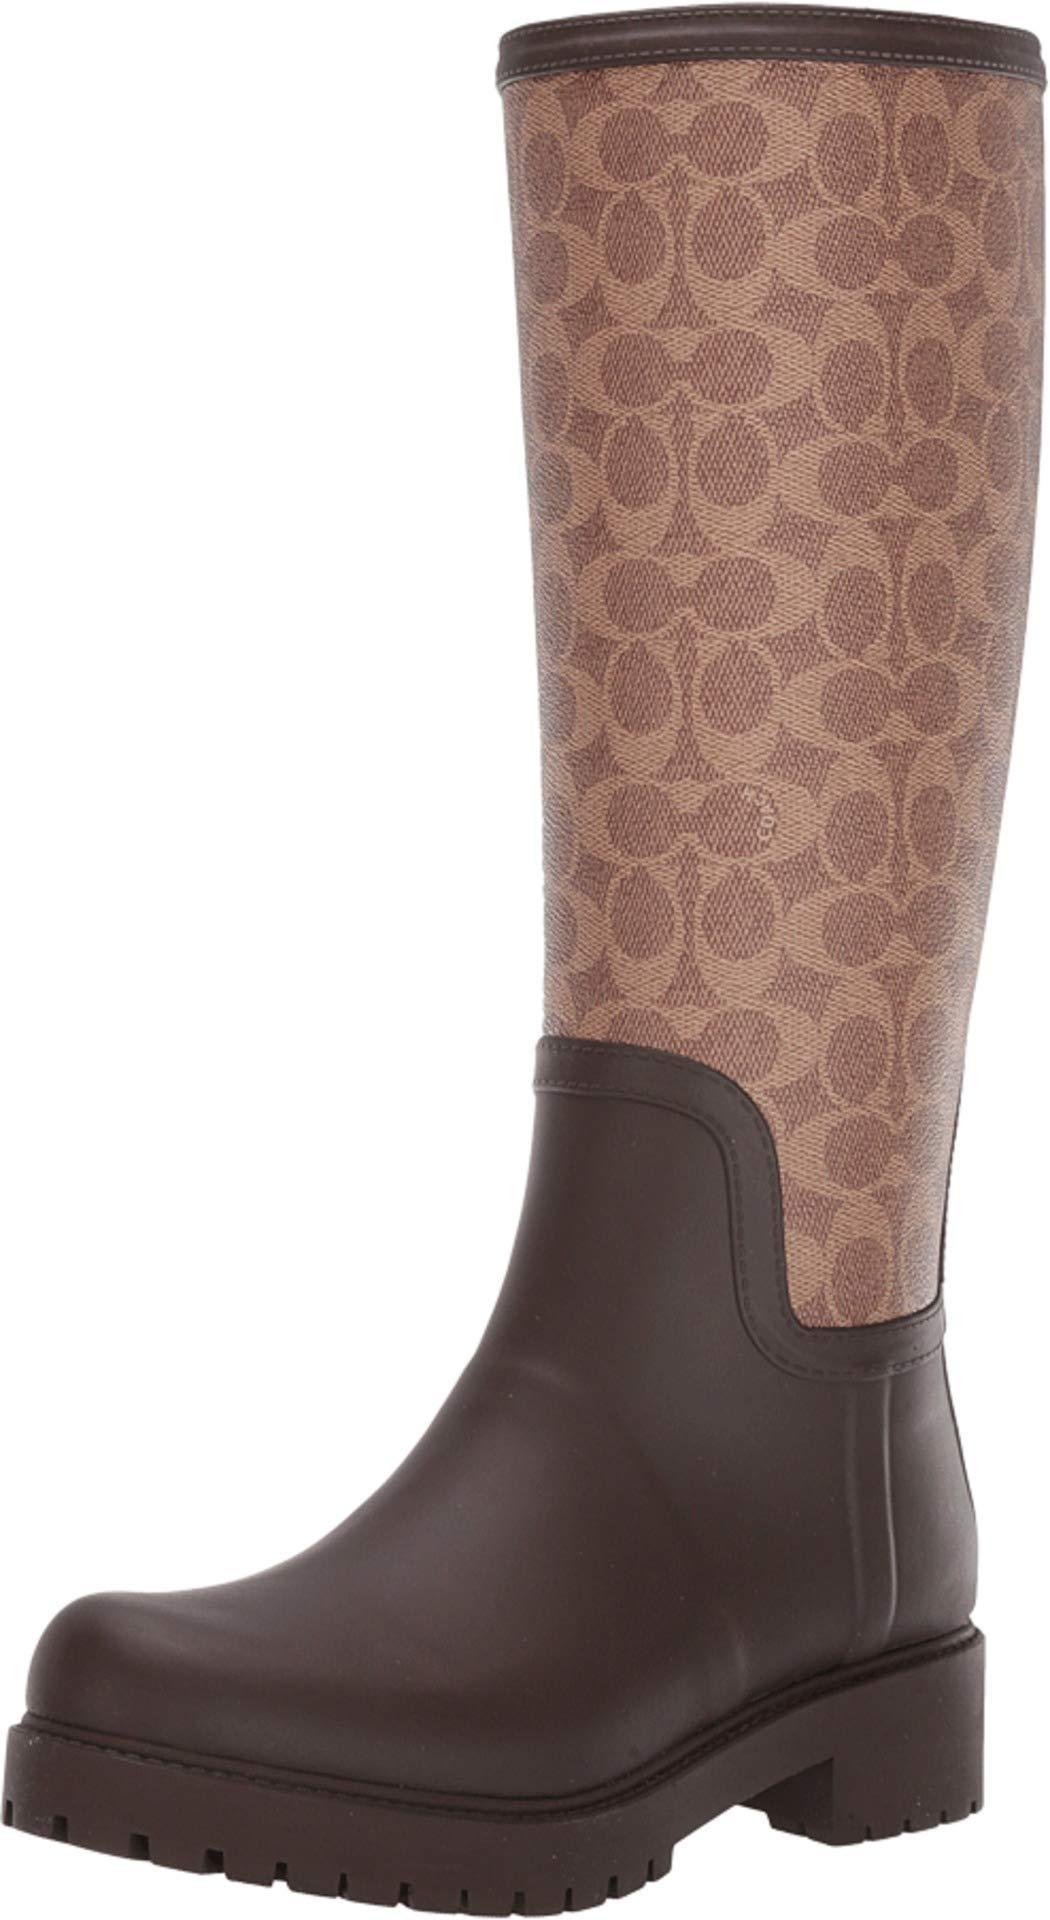 COACH Signature Rain Boot With Signature Coated Canvas in Brown - Lyst